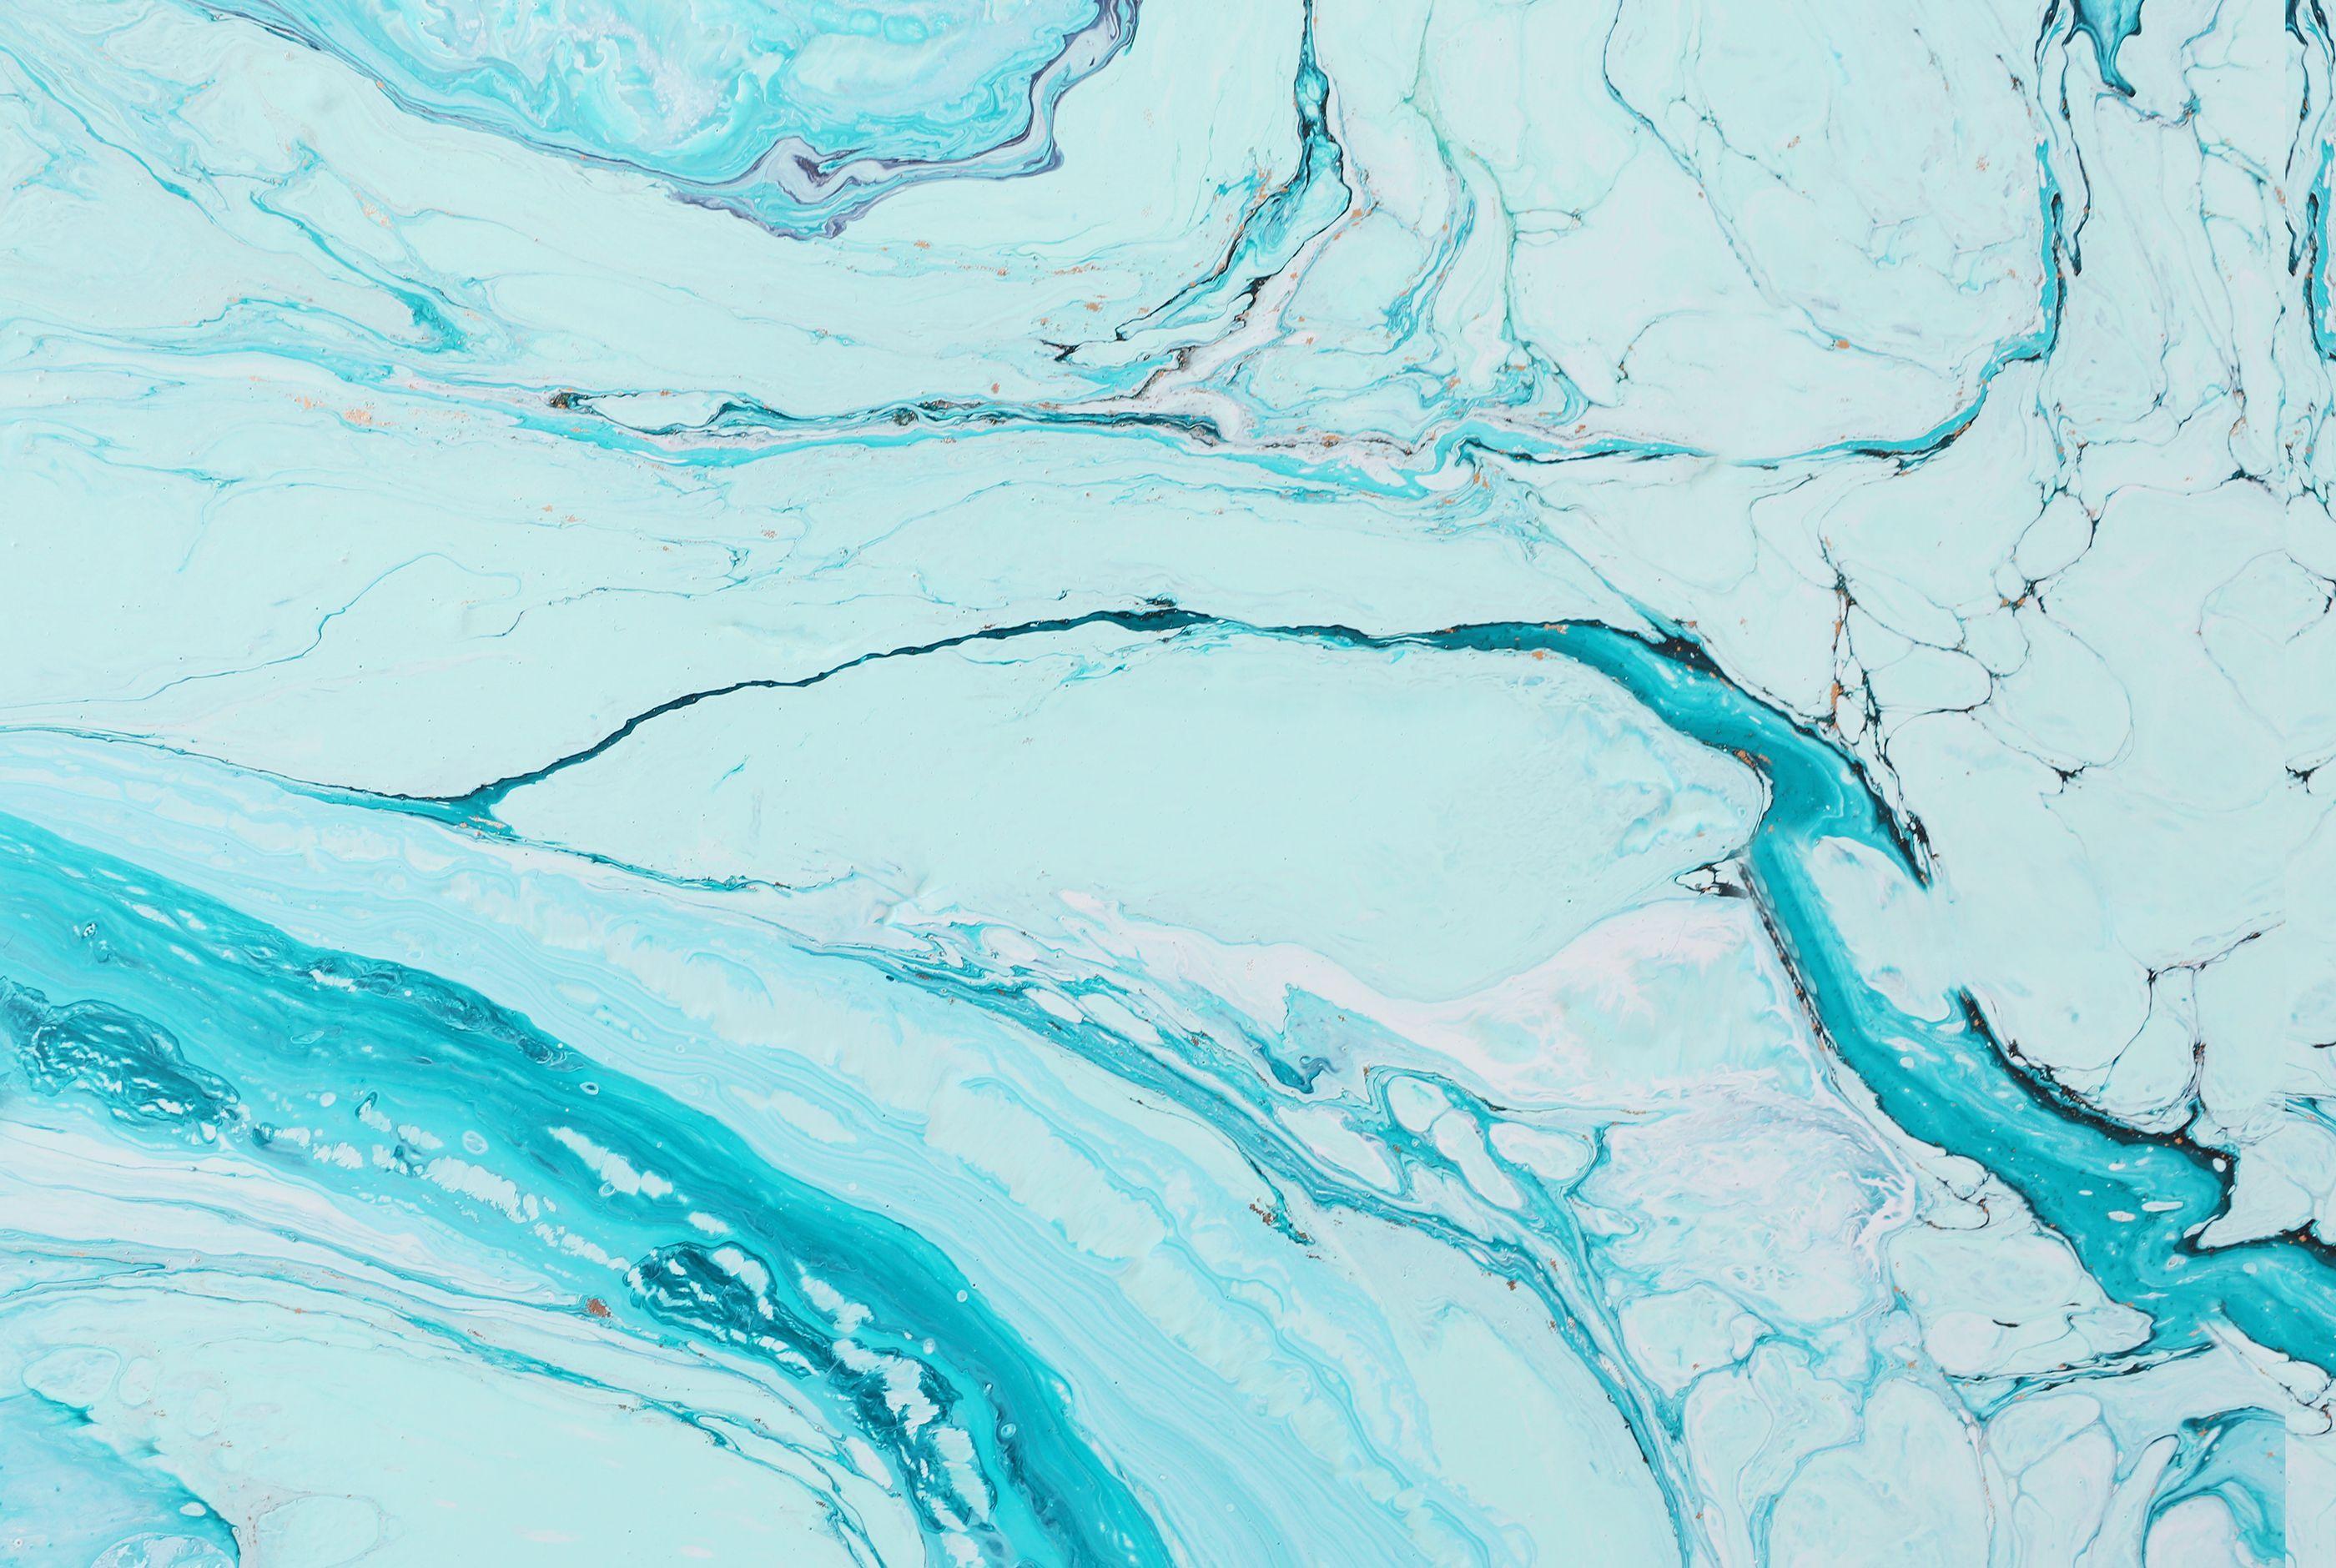 14044 Teal Marble Background Images Stock Photos  Vectors  Shutterstock